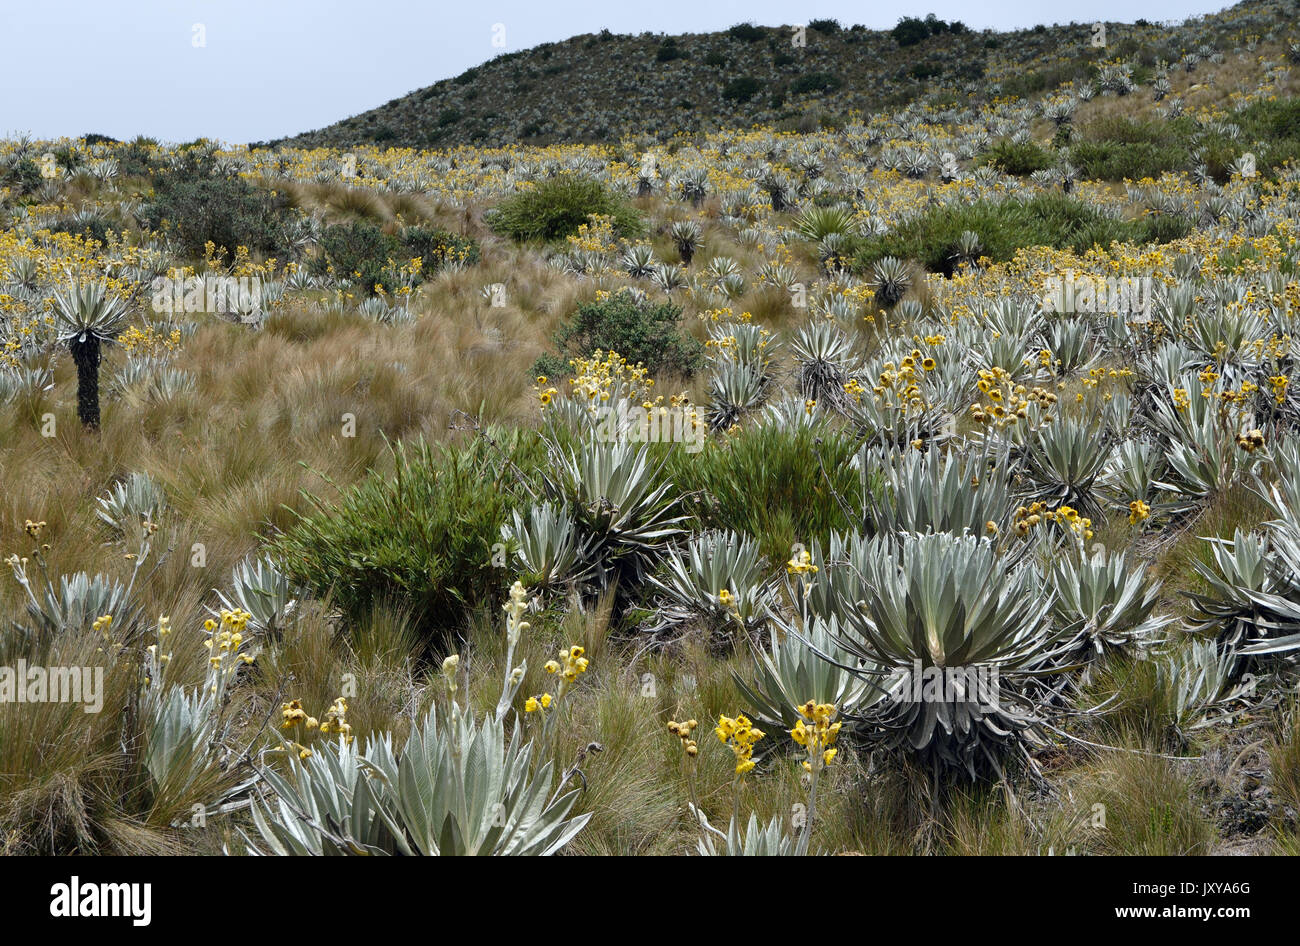 Paramo is a type of alpine tundra vegetation confined to the tropics. The example here is in the Chingaza National Park in the Colombian Andes. Stock Photo